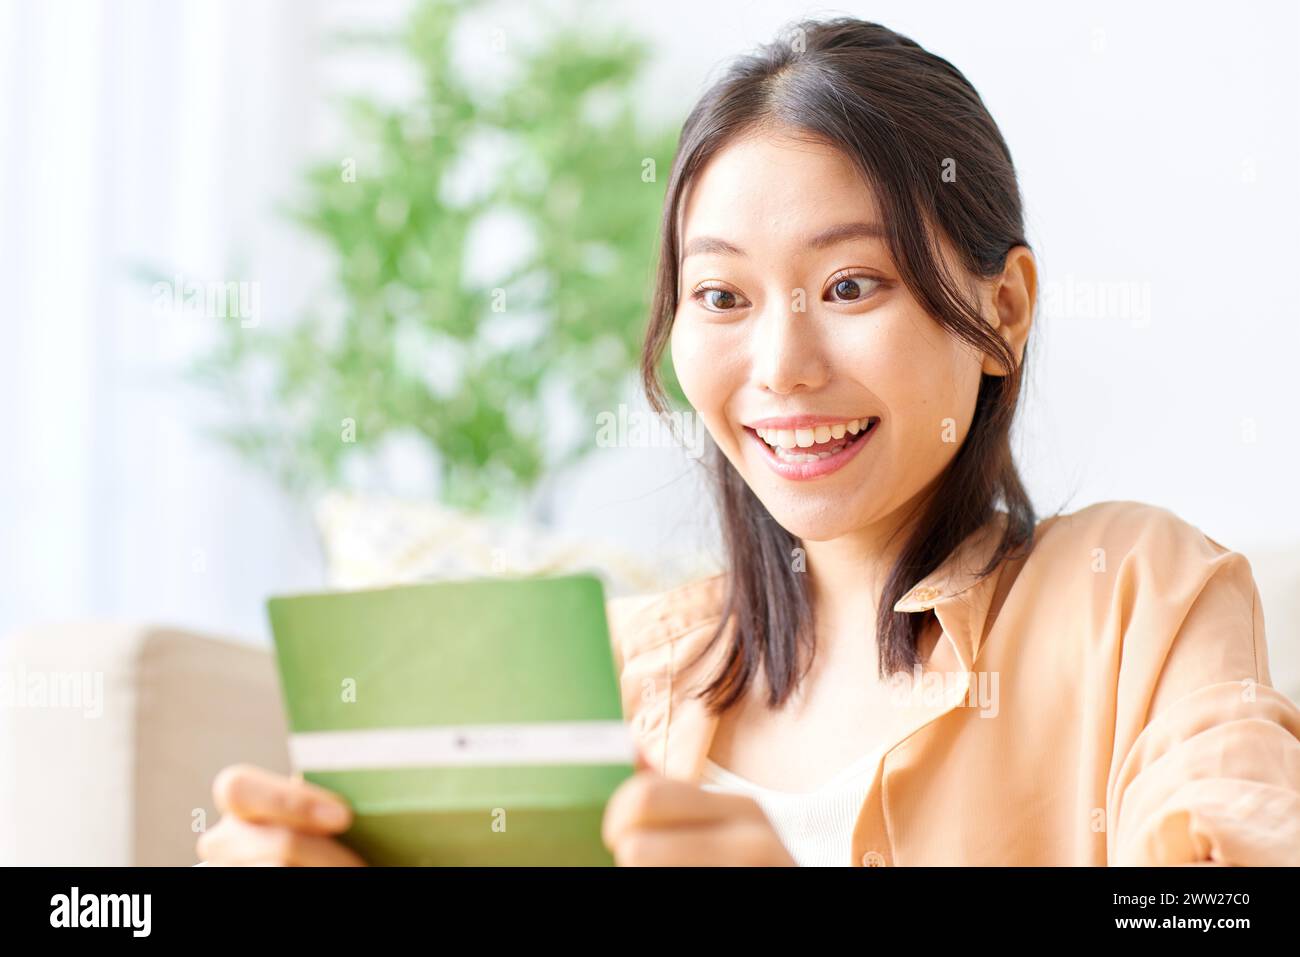 A woman smiling while holding a bank note Stock Photo